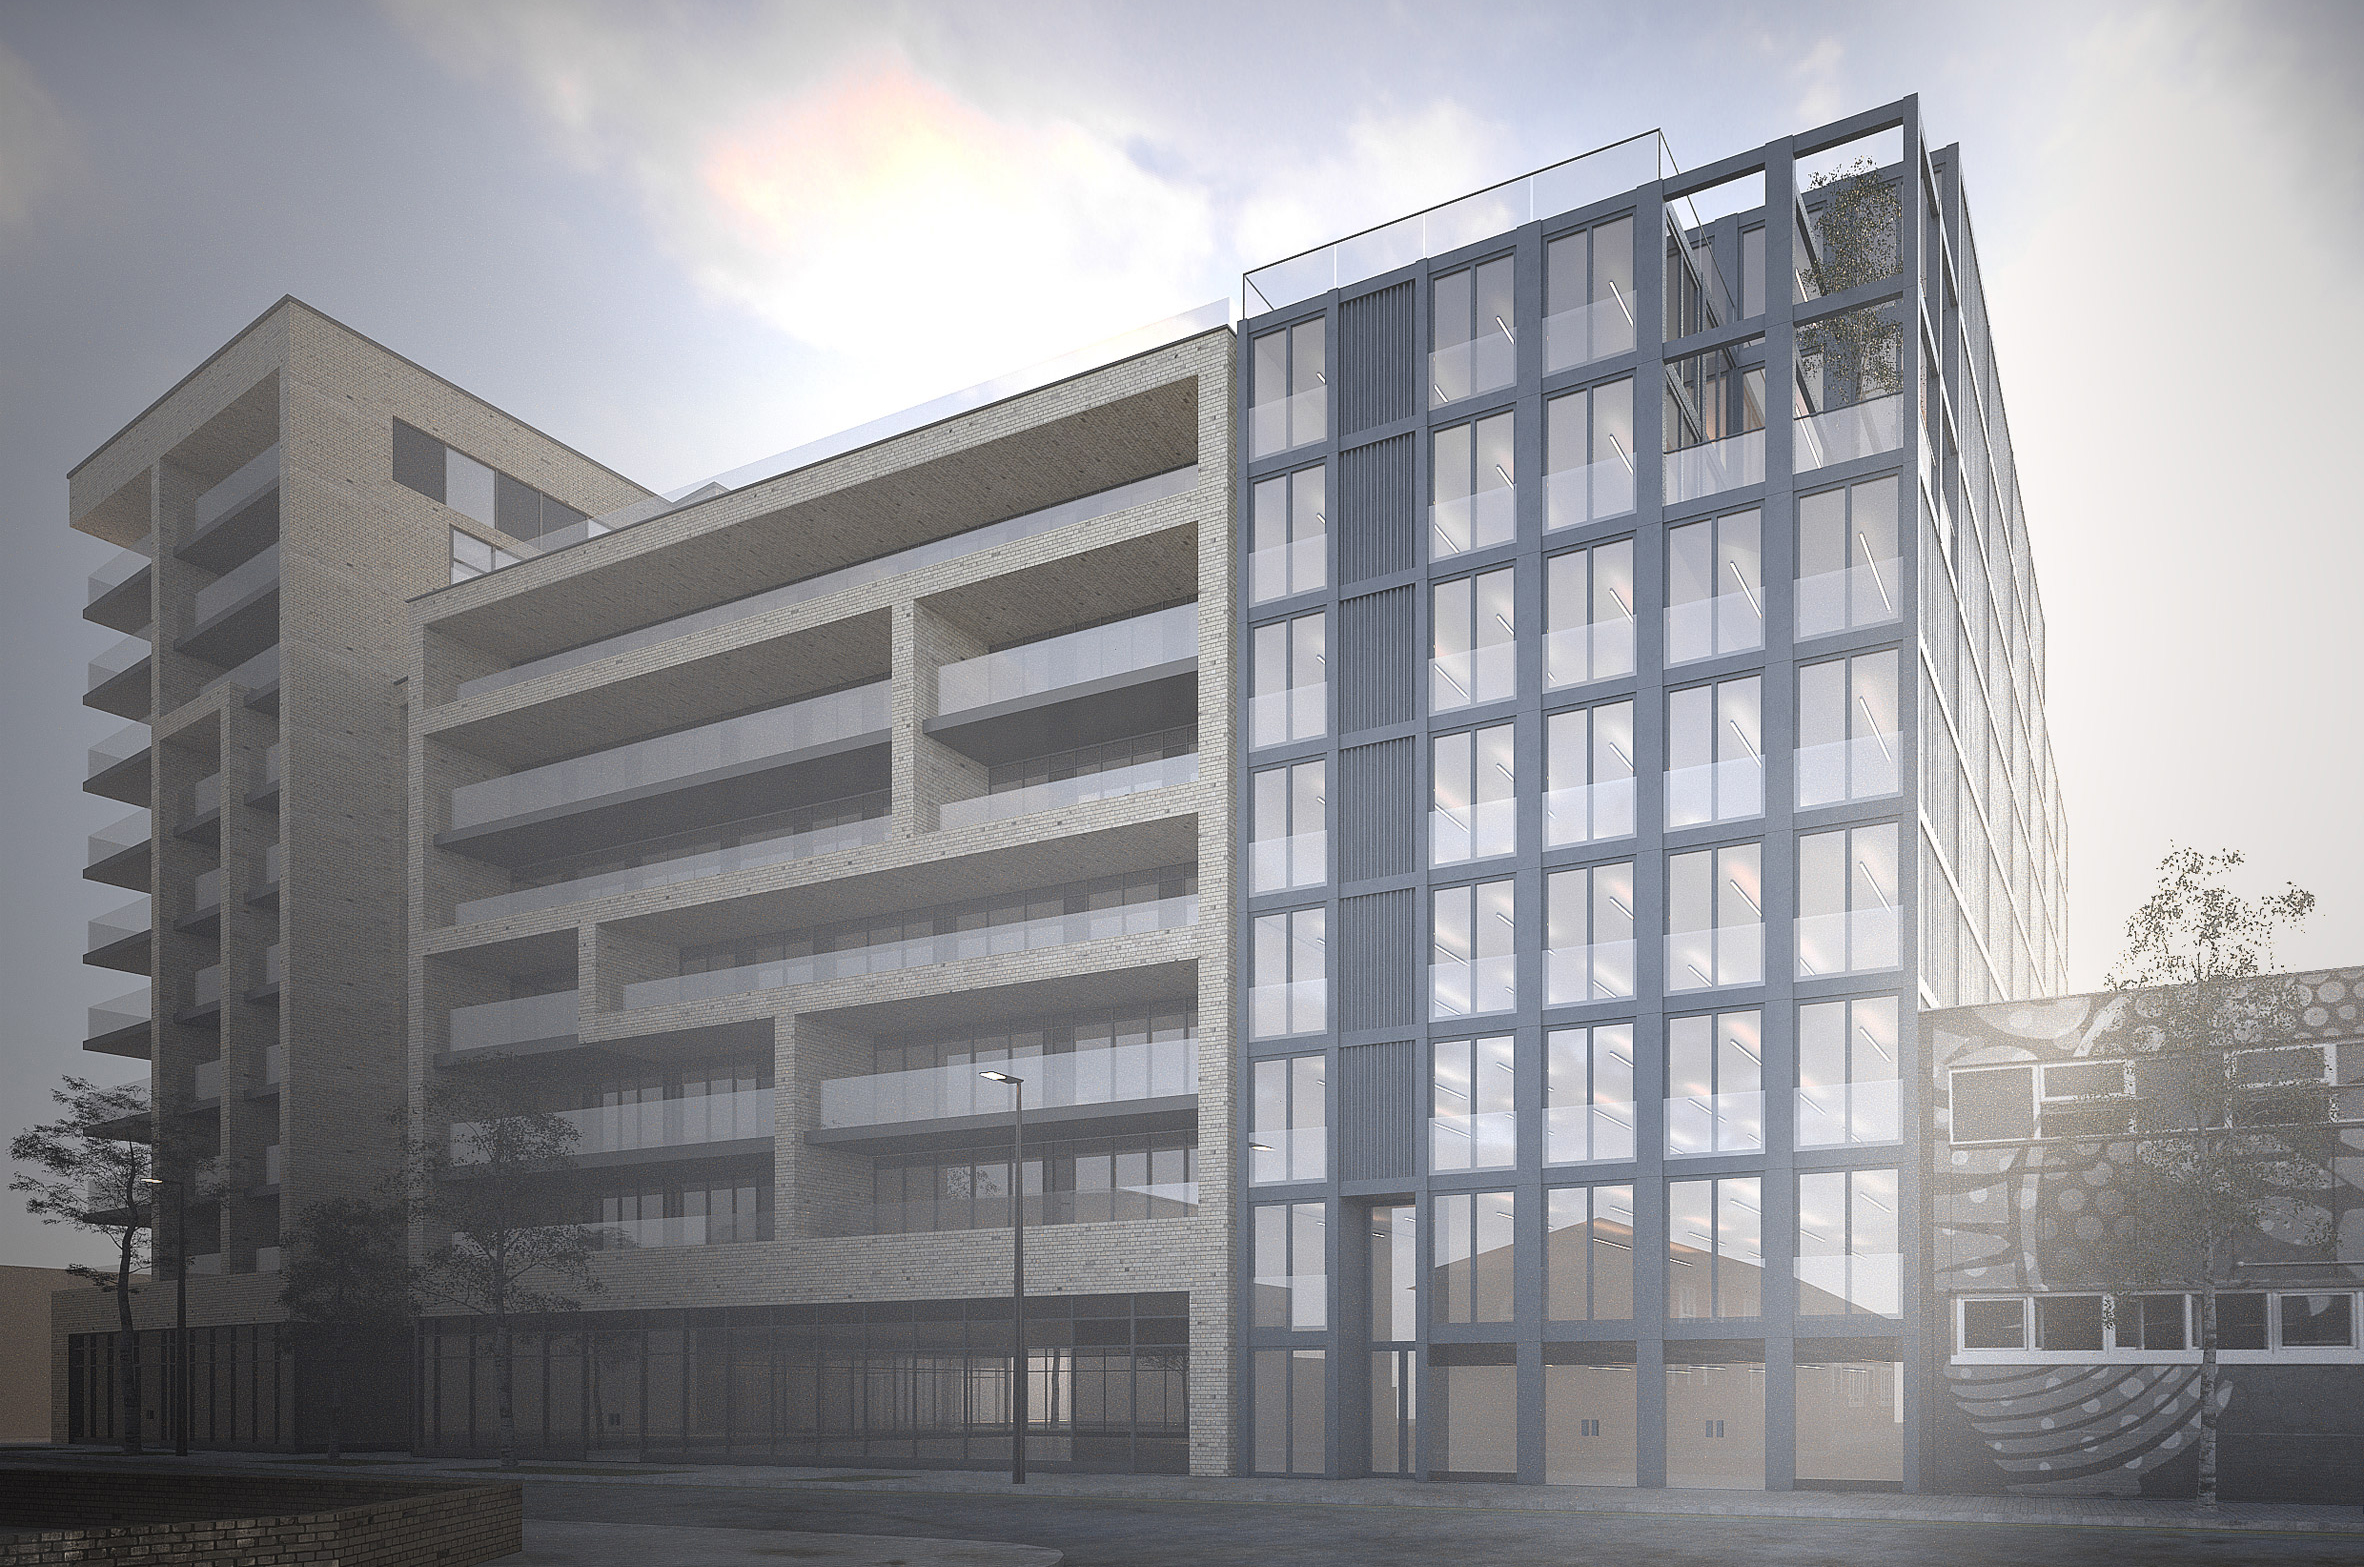 And finally... London approves plans for world’s tallest shipping-container building